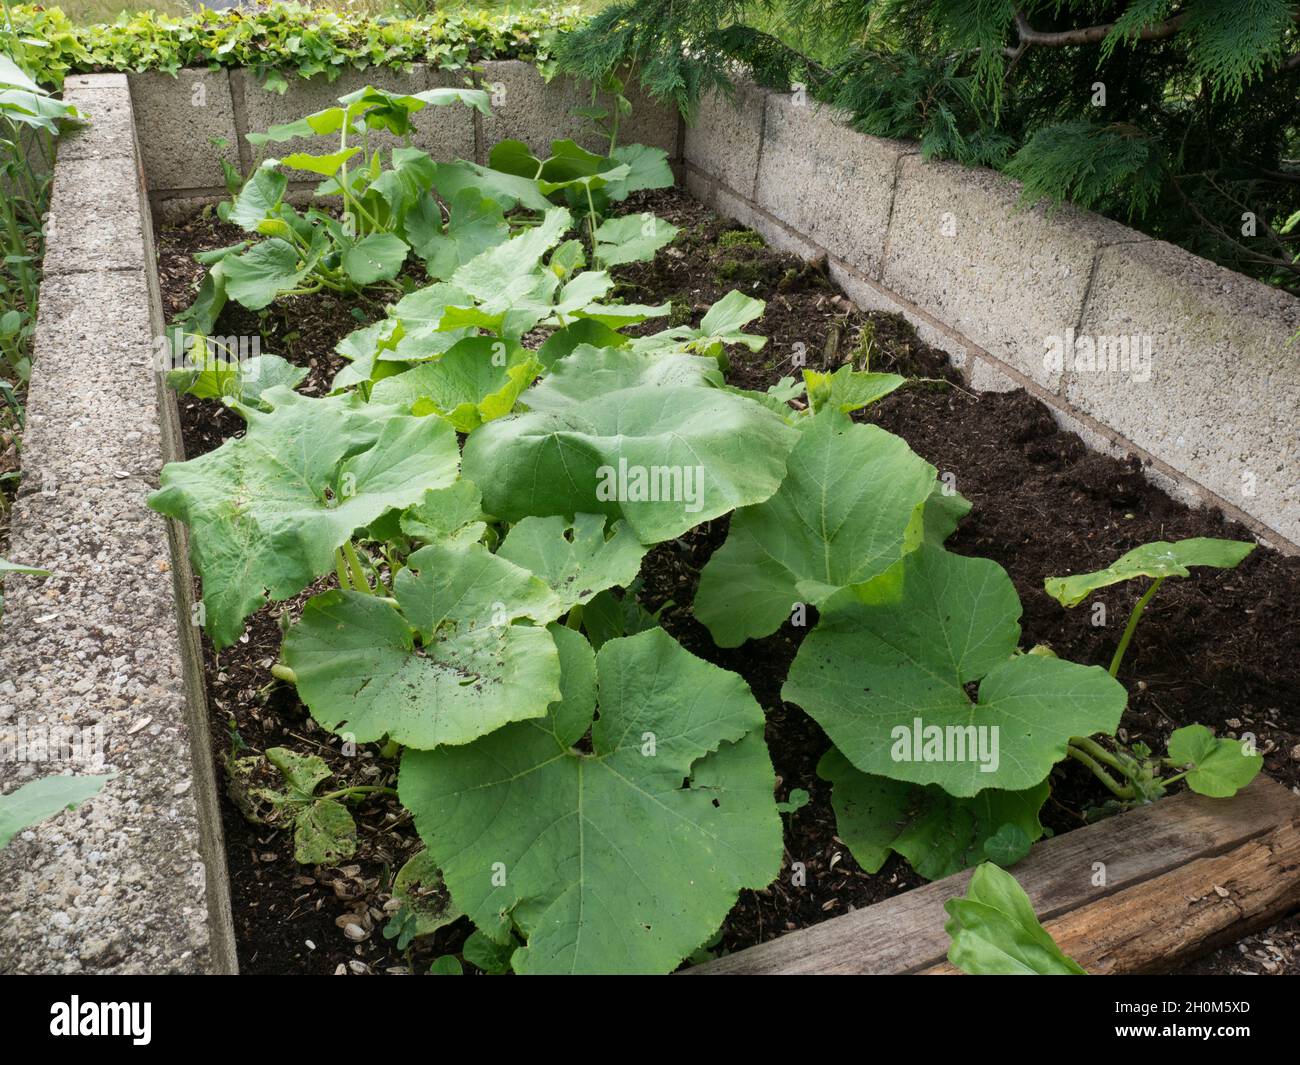 Squashes growing in compost bin, Worcestershire, UK Stock Photo